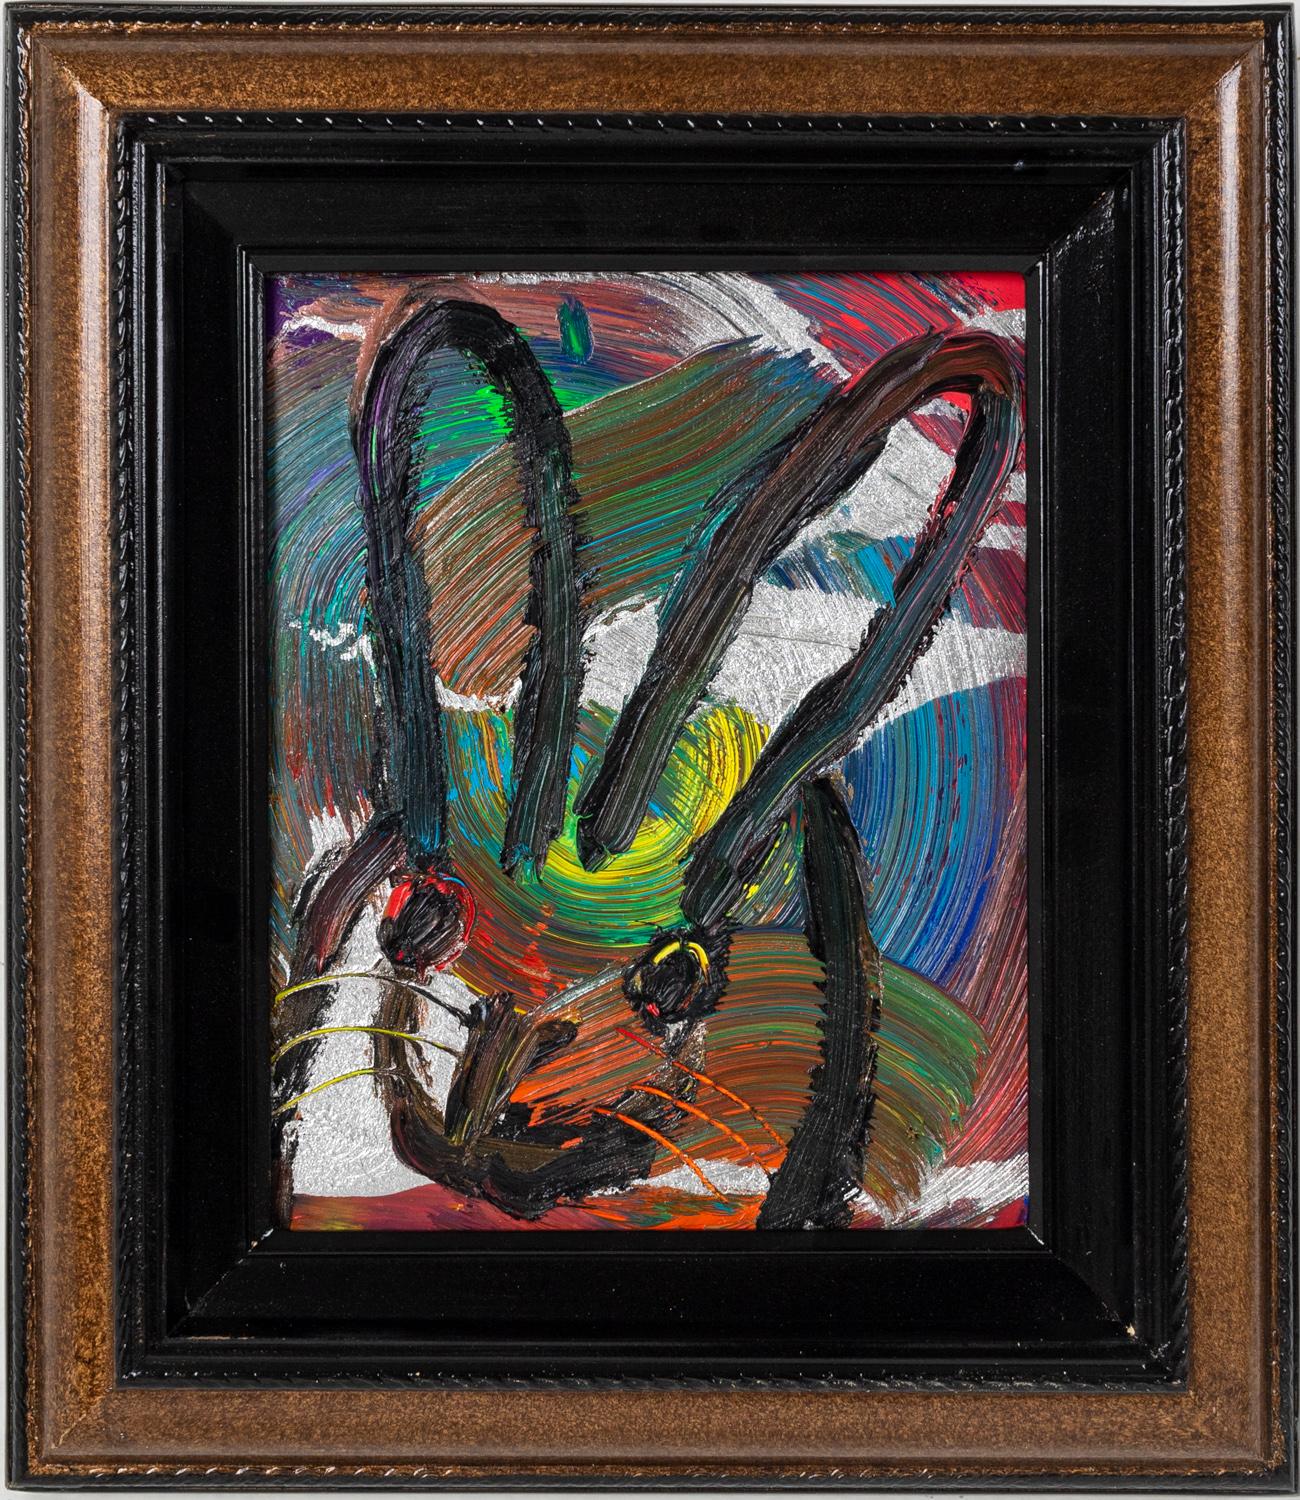 Hunt Slonem Figurative Painting - Charles "Bunny Painting" Original Multi-Colored Oil Painting in Vintage Frame